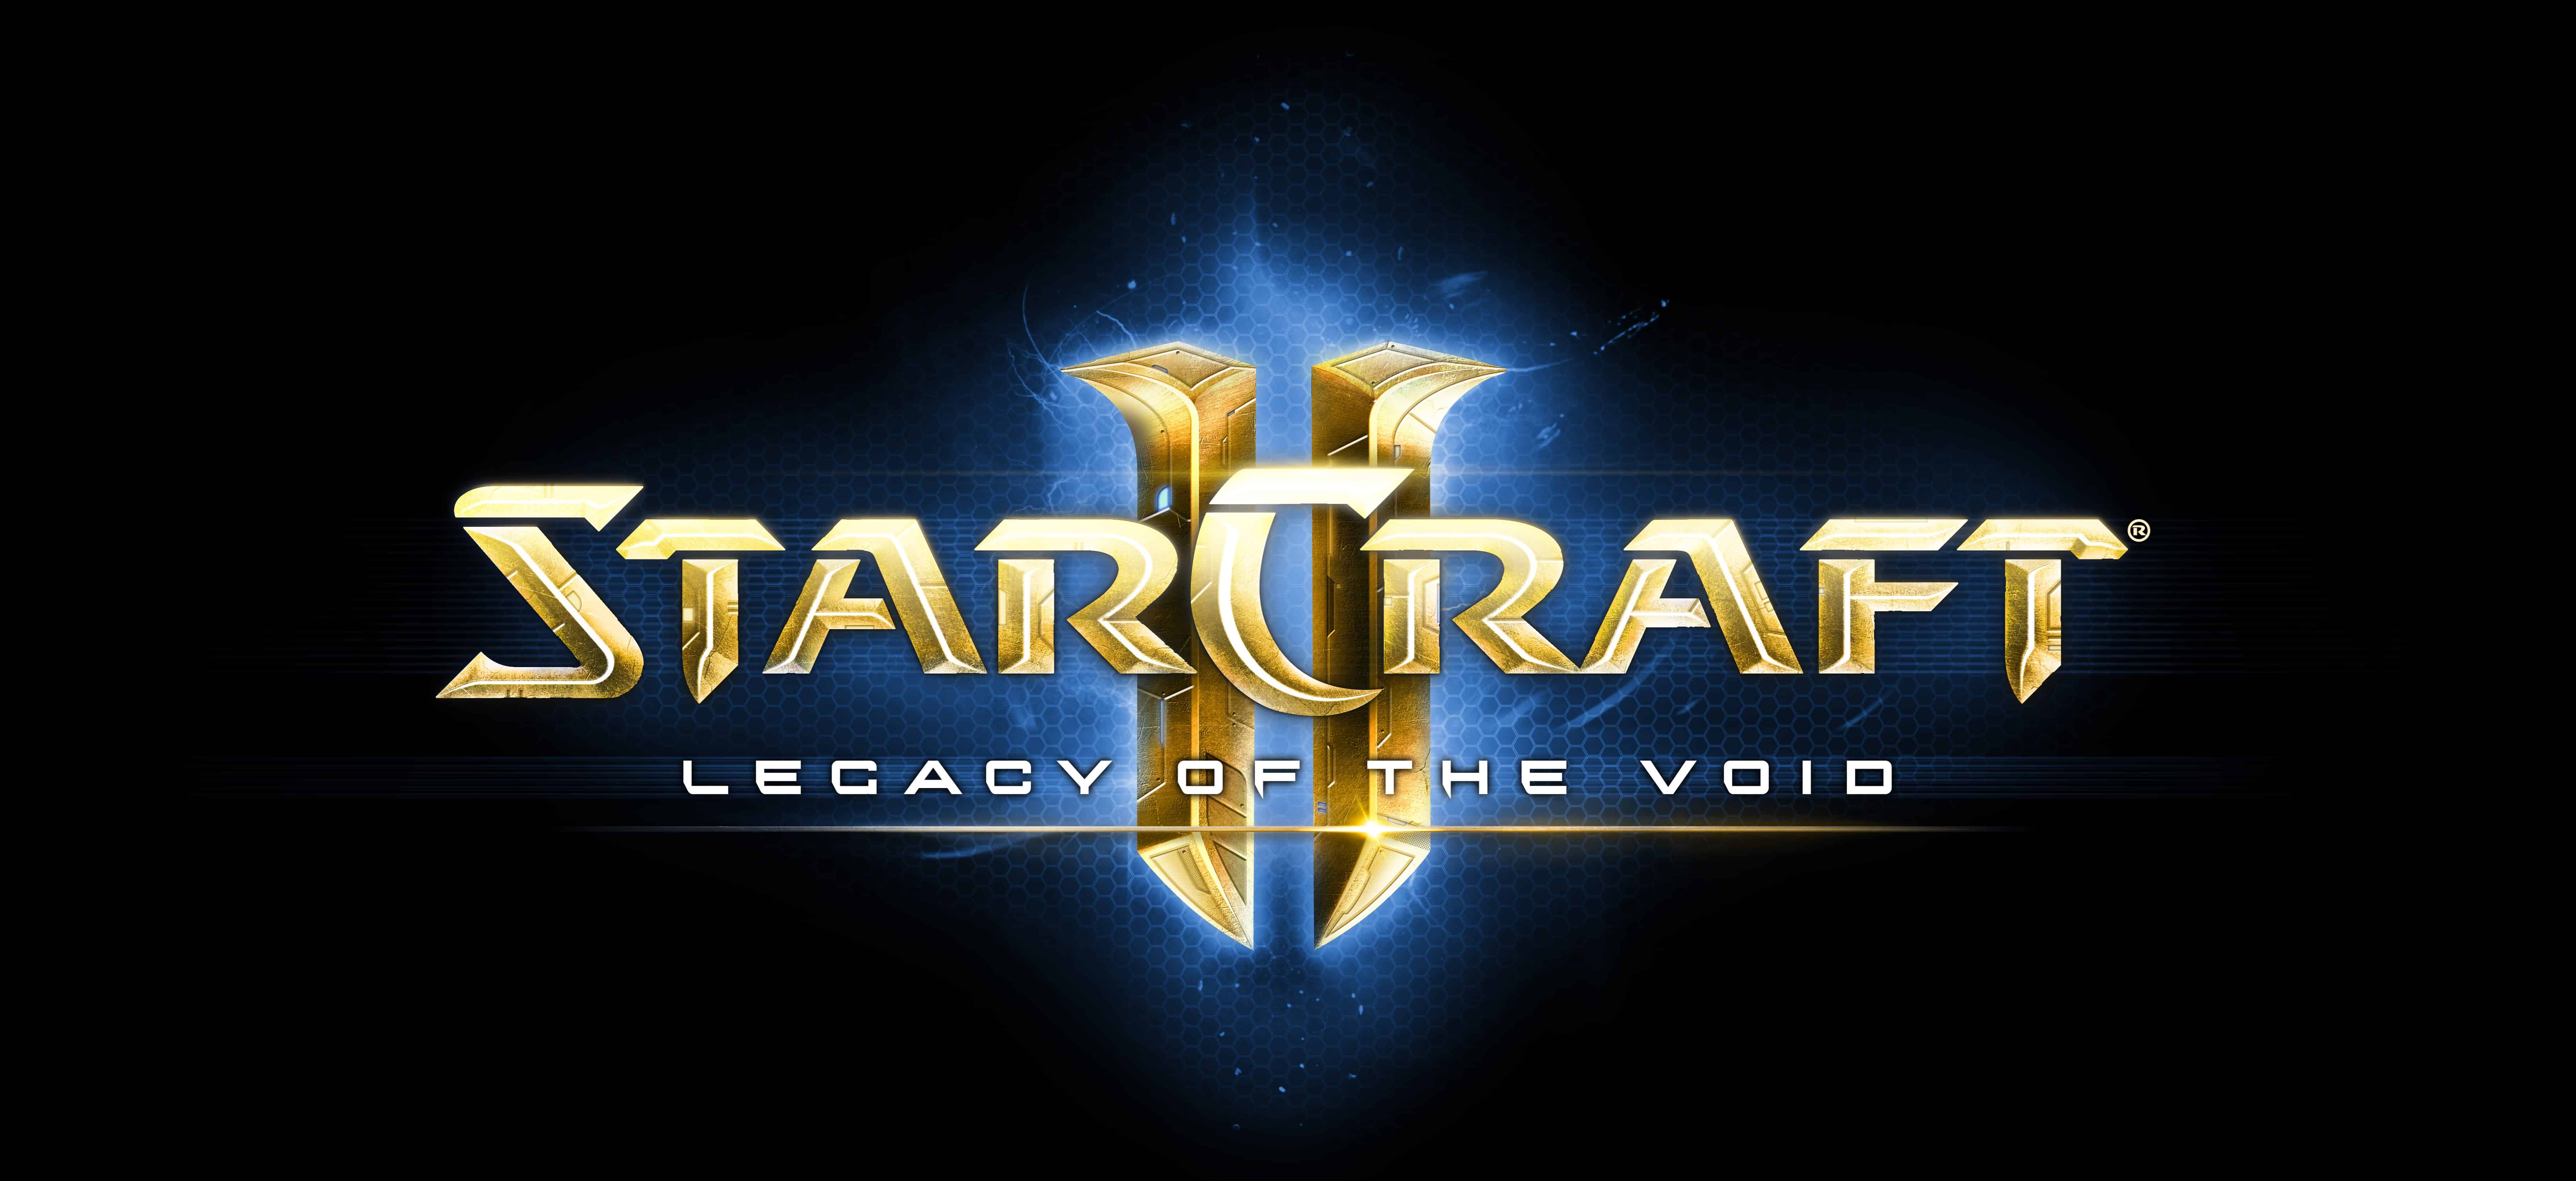 Starcraft II Legacy of the Void - Recensione 2